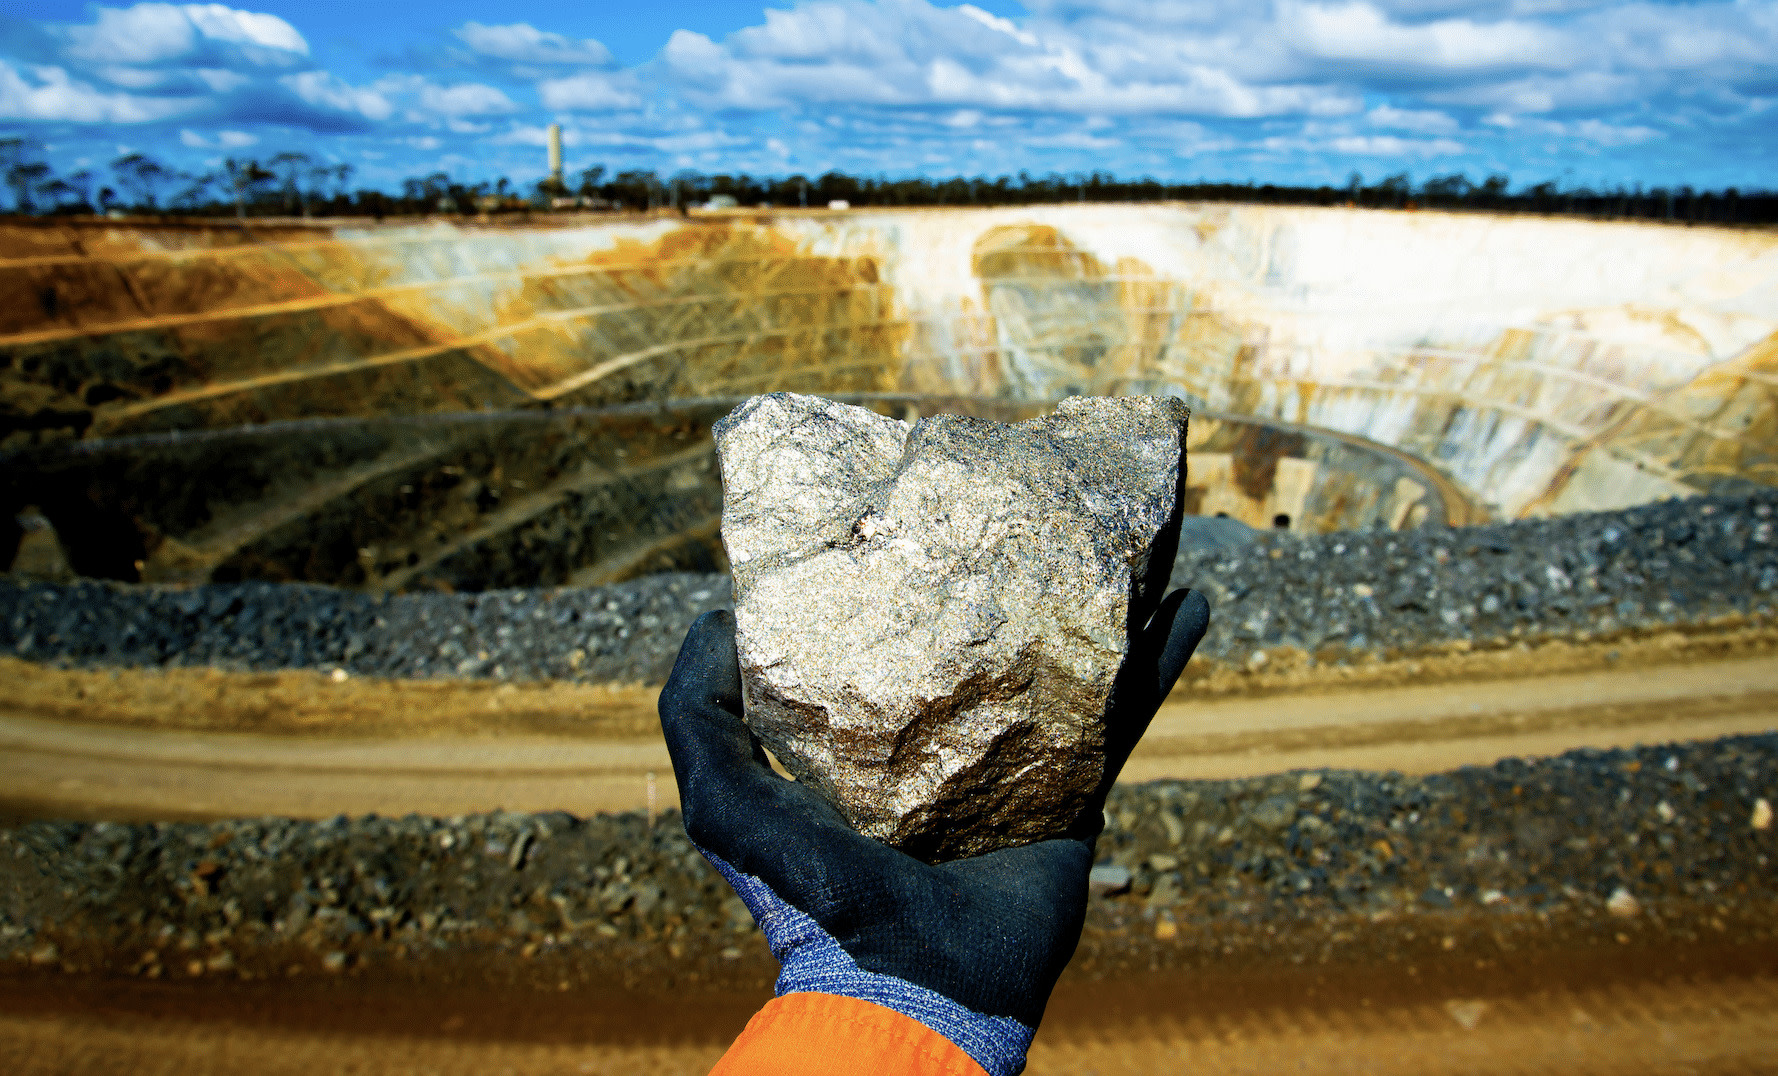 South African Companies Lauded for Responsible Mining